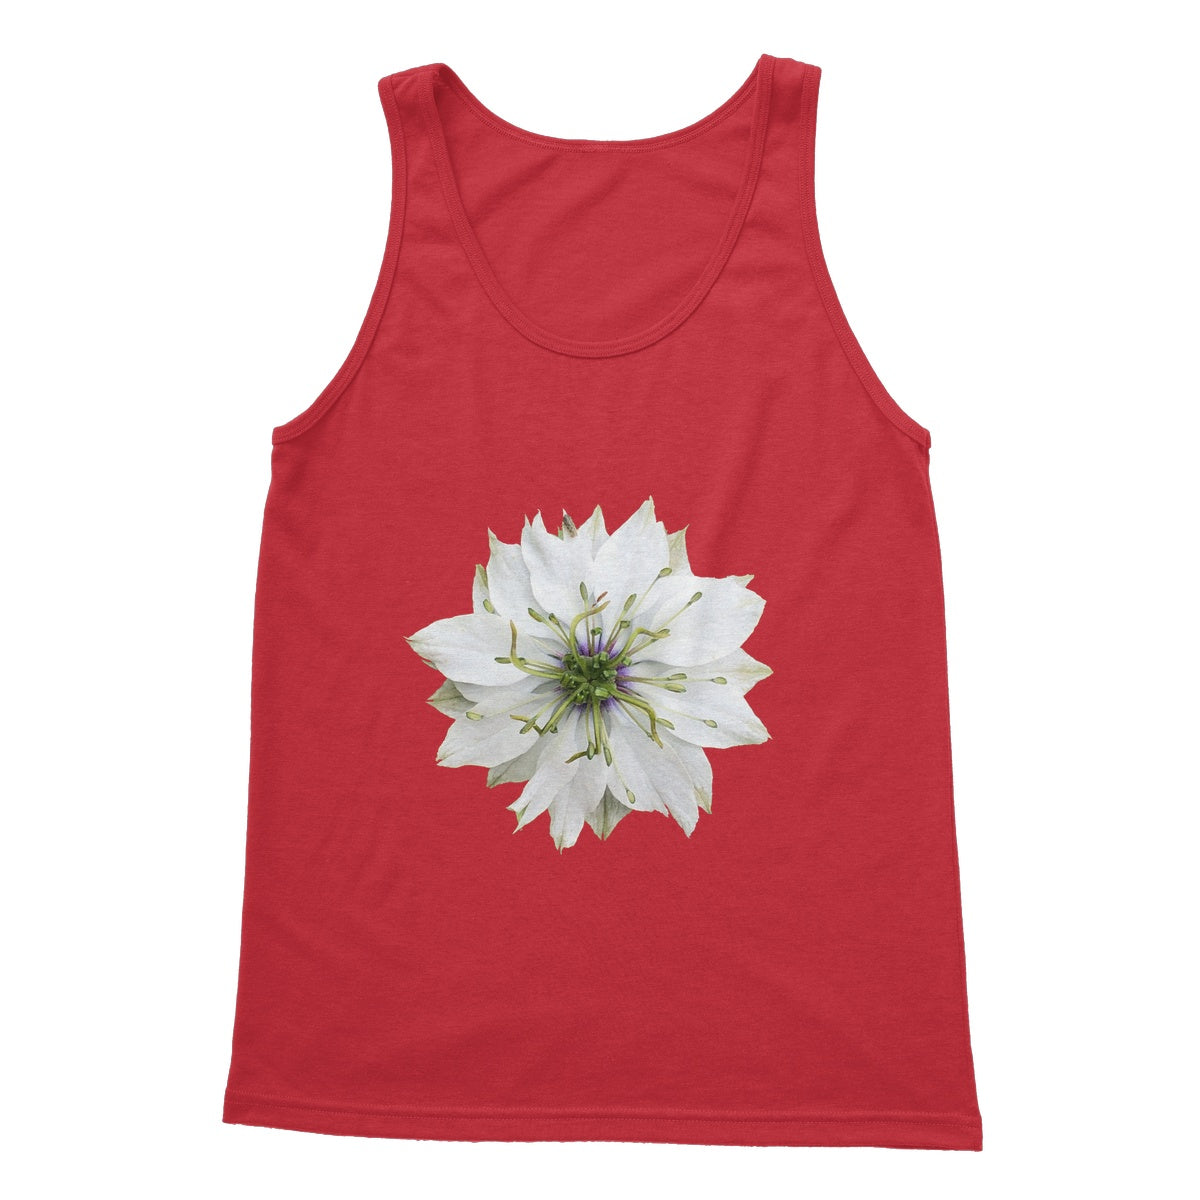 White Flower 'Nigella Love in the Mist' Softstyle Tank Top - Nature of Flowers